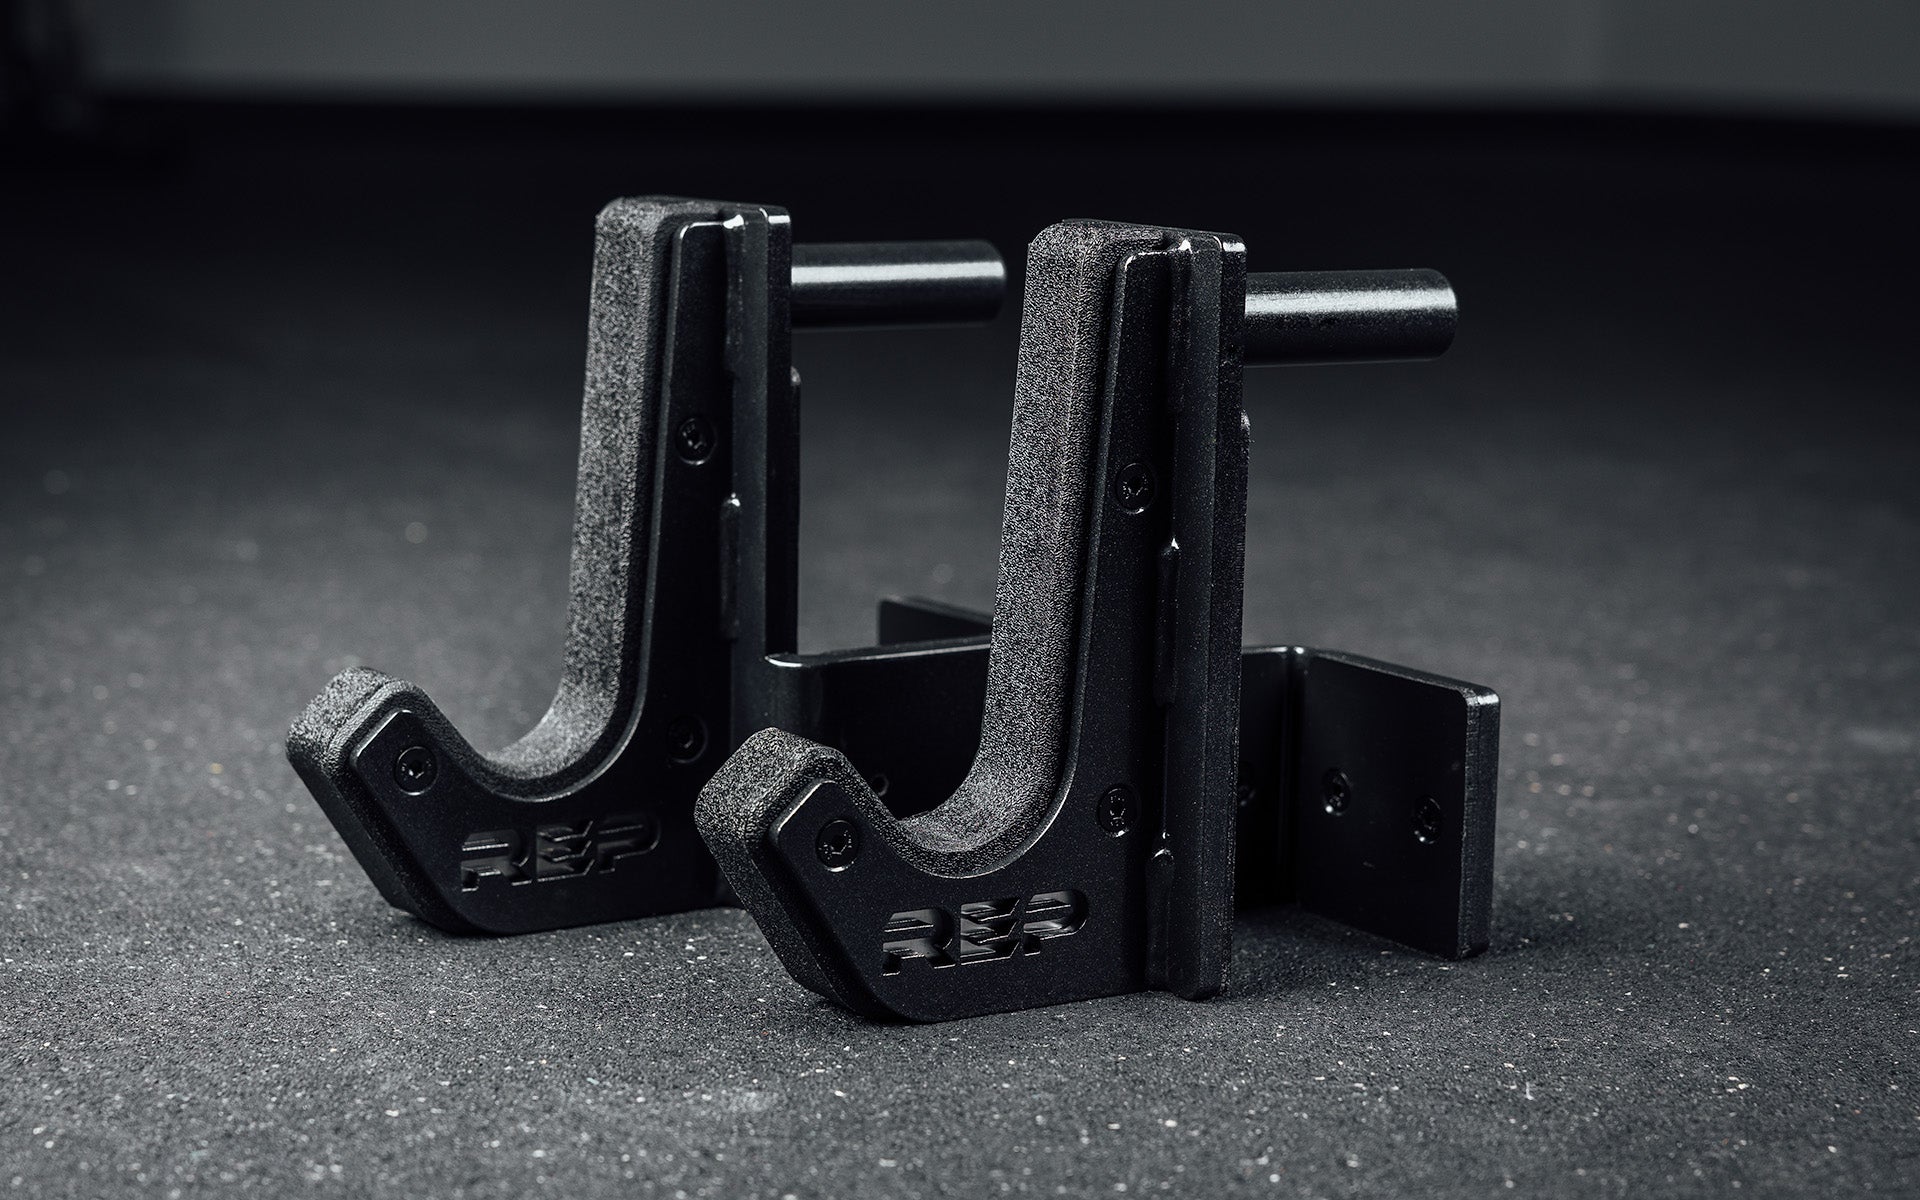 Round Sandwich J-Cups | Rep Fitness | Rack Attachments